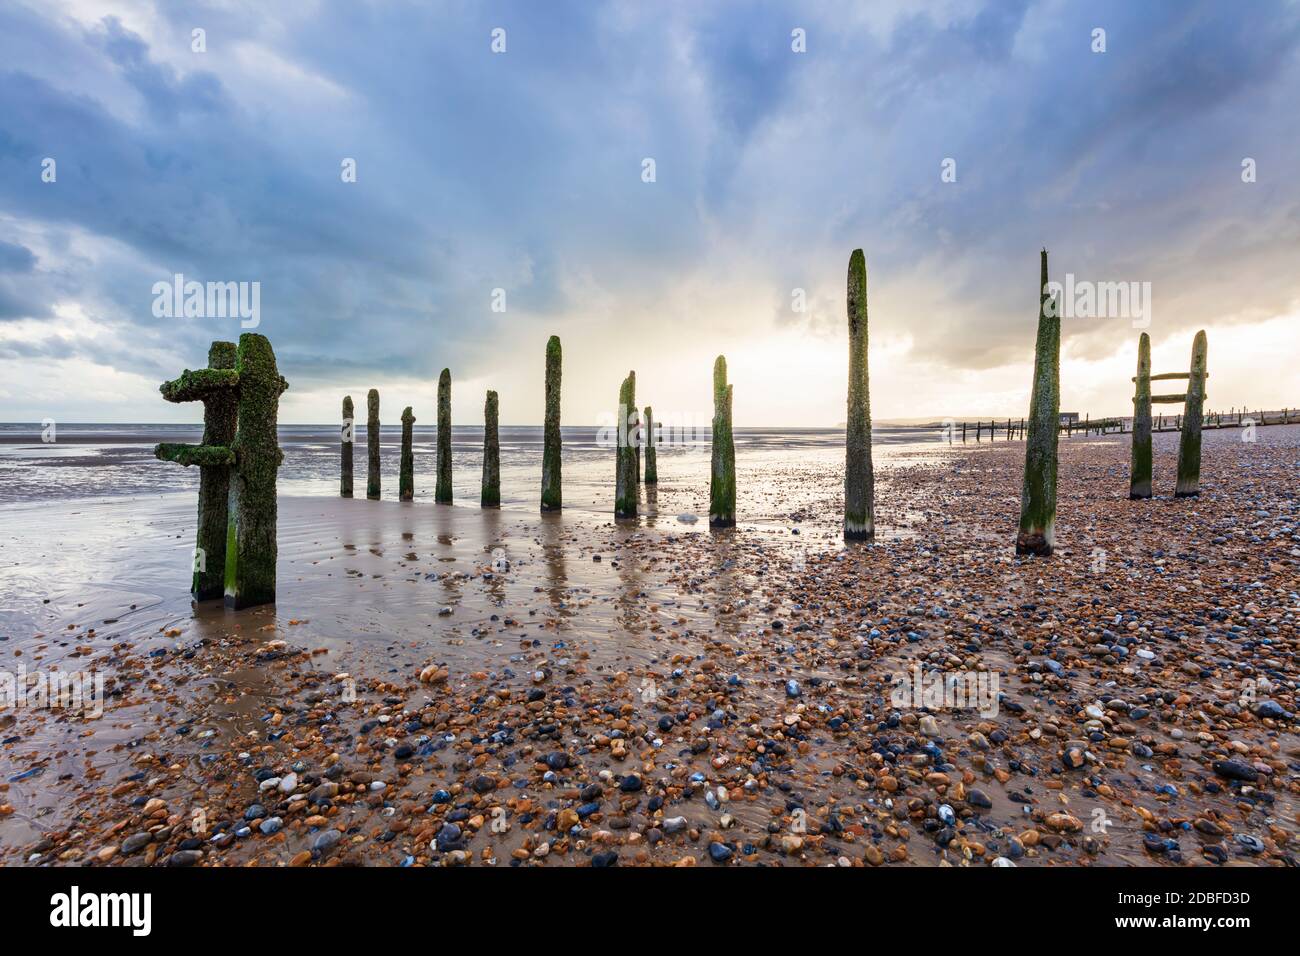 Rotting upright wooden posts of old sea defences on Winchelsea beach, Winchelsea, East Sussex, England, United Kingdom, Europe Stock Photo